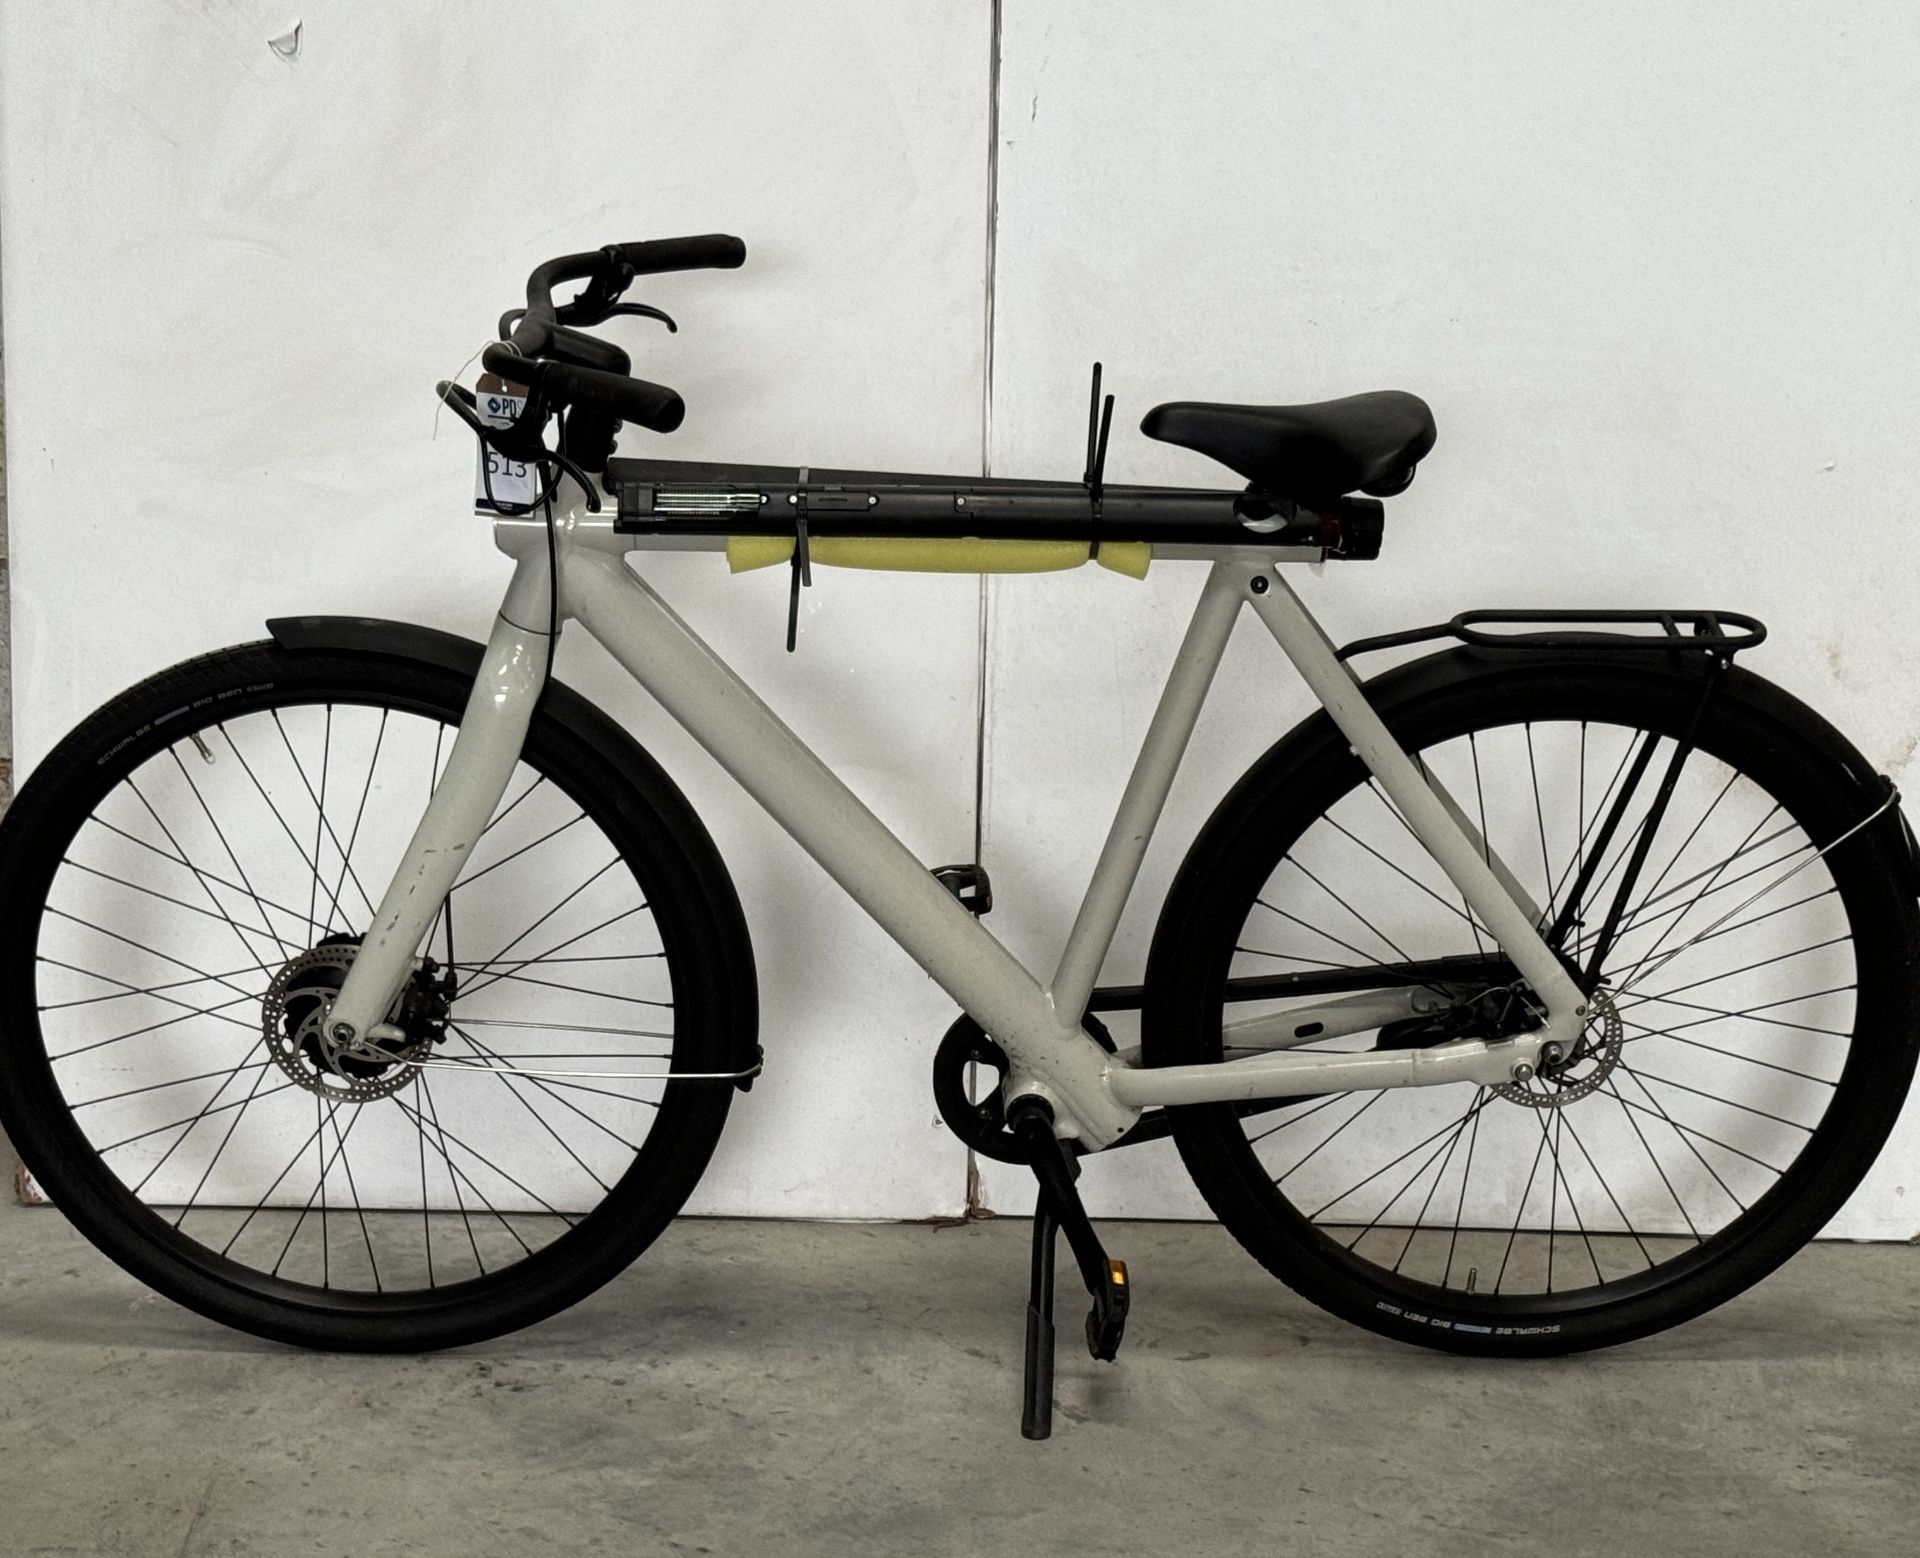 VanMoof S2 Electric Bike, Frame Number AST8808571 (NOT ROADWORTHY - FOR SPARES ONLY) (No codes